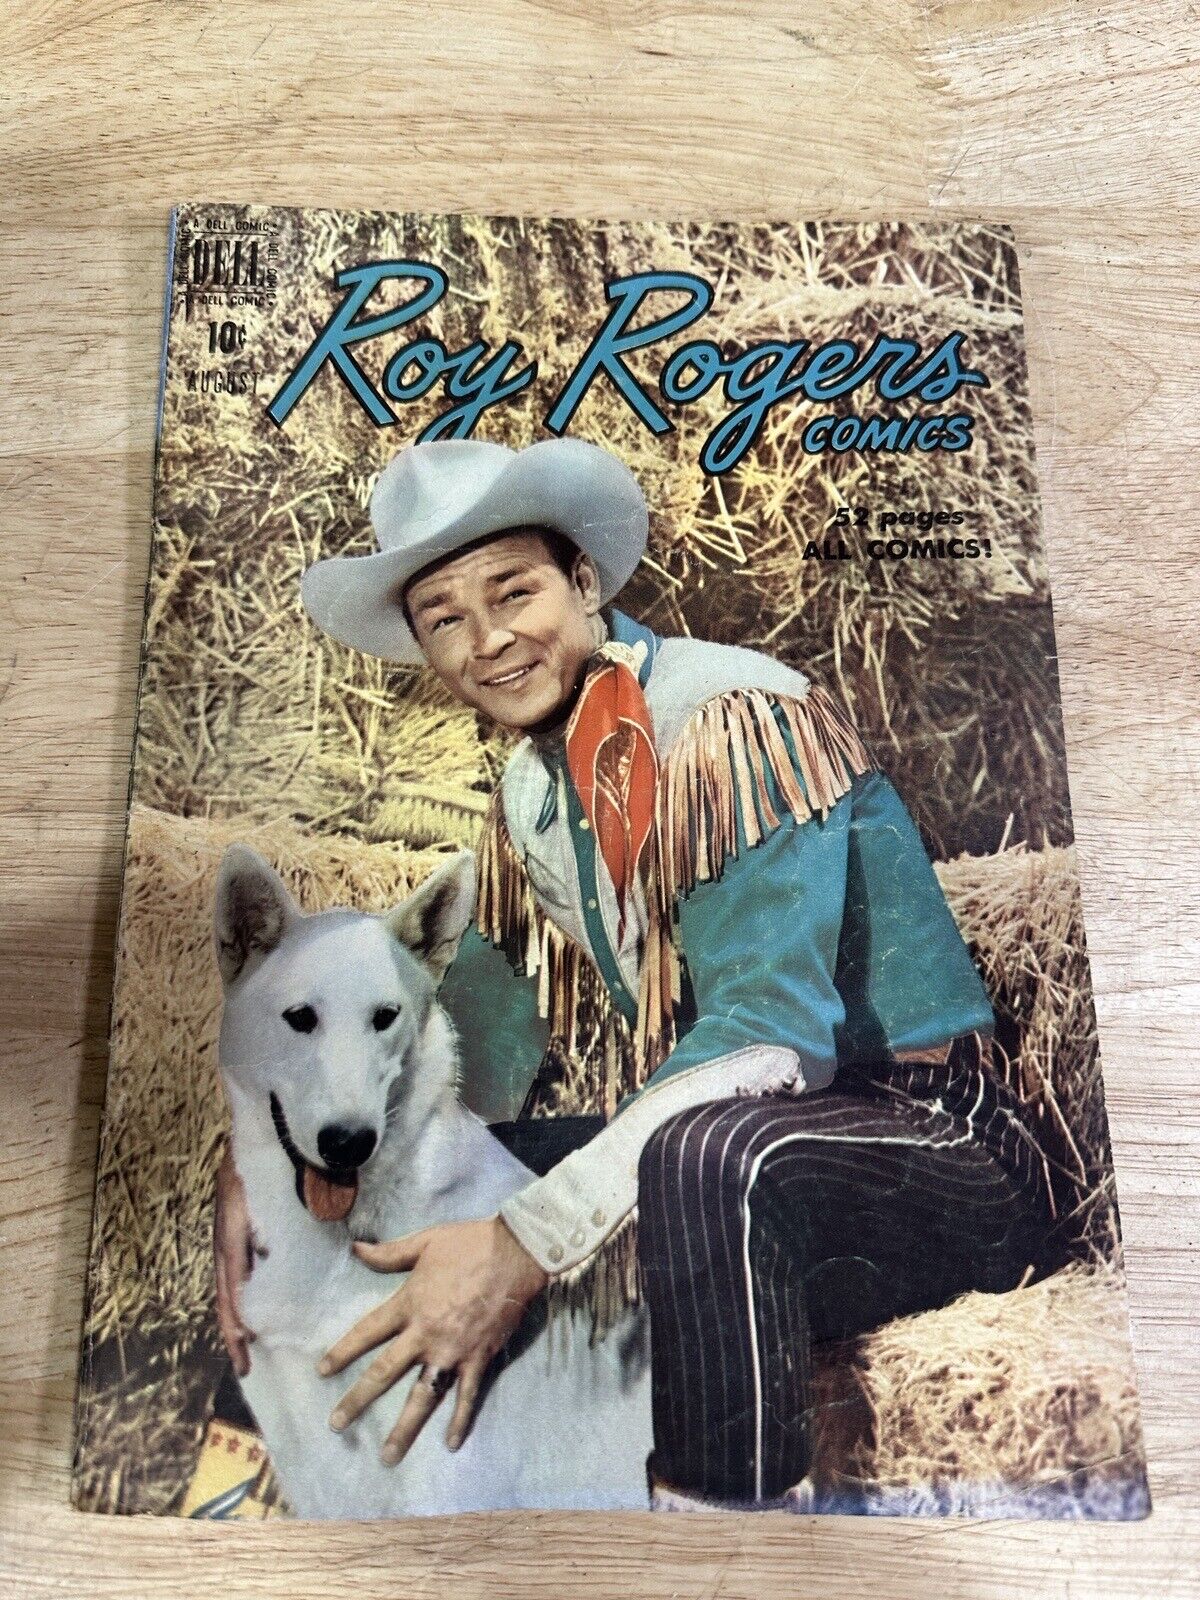 VINTAGE ROY ROGERS COMICS #32 1950 DELL COMICS GOLDEN AGE WESTERN PHOTO COVER